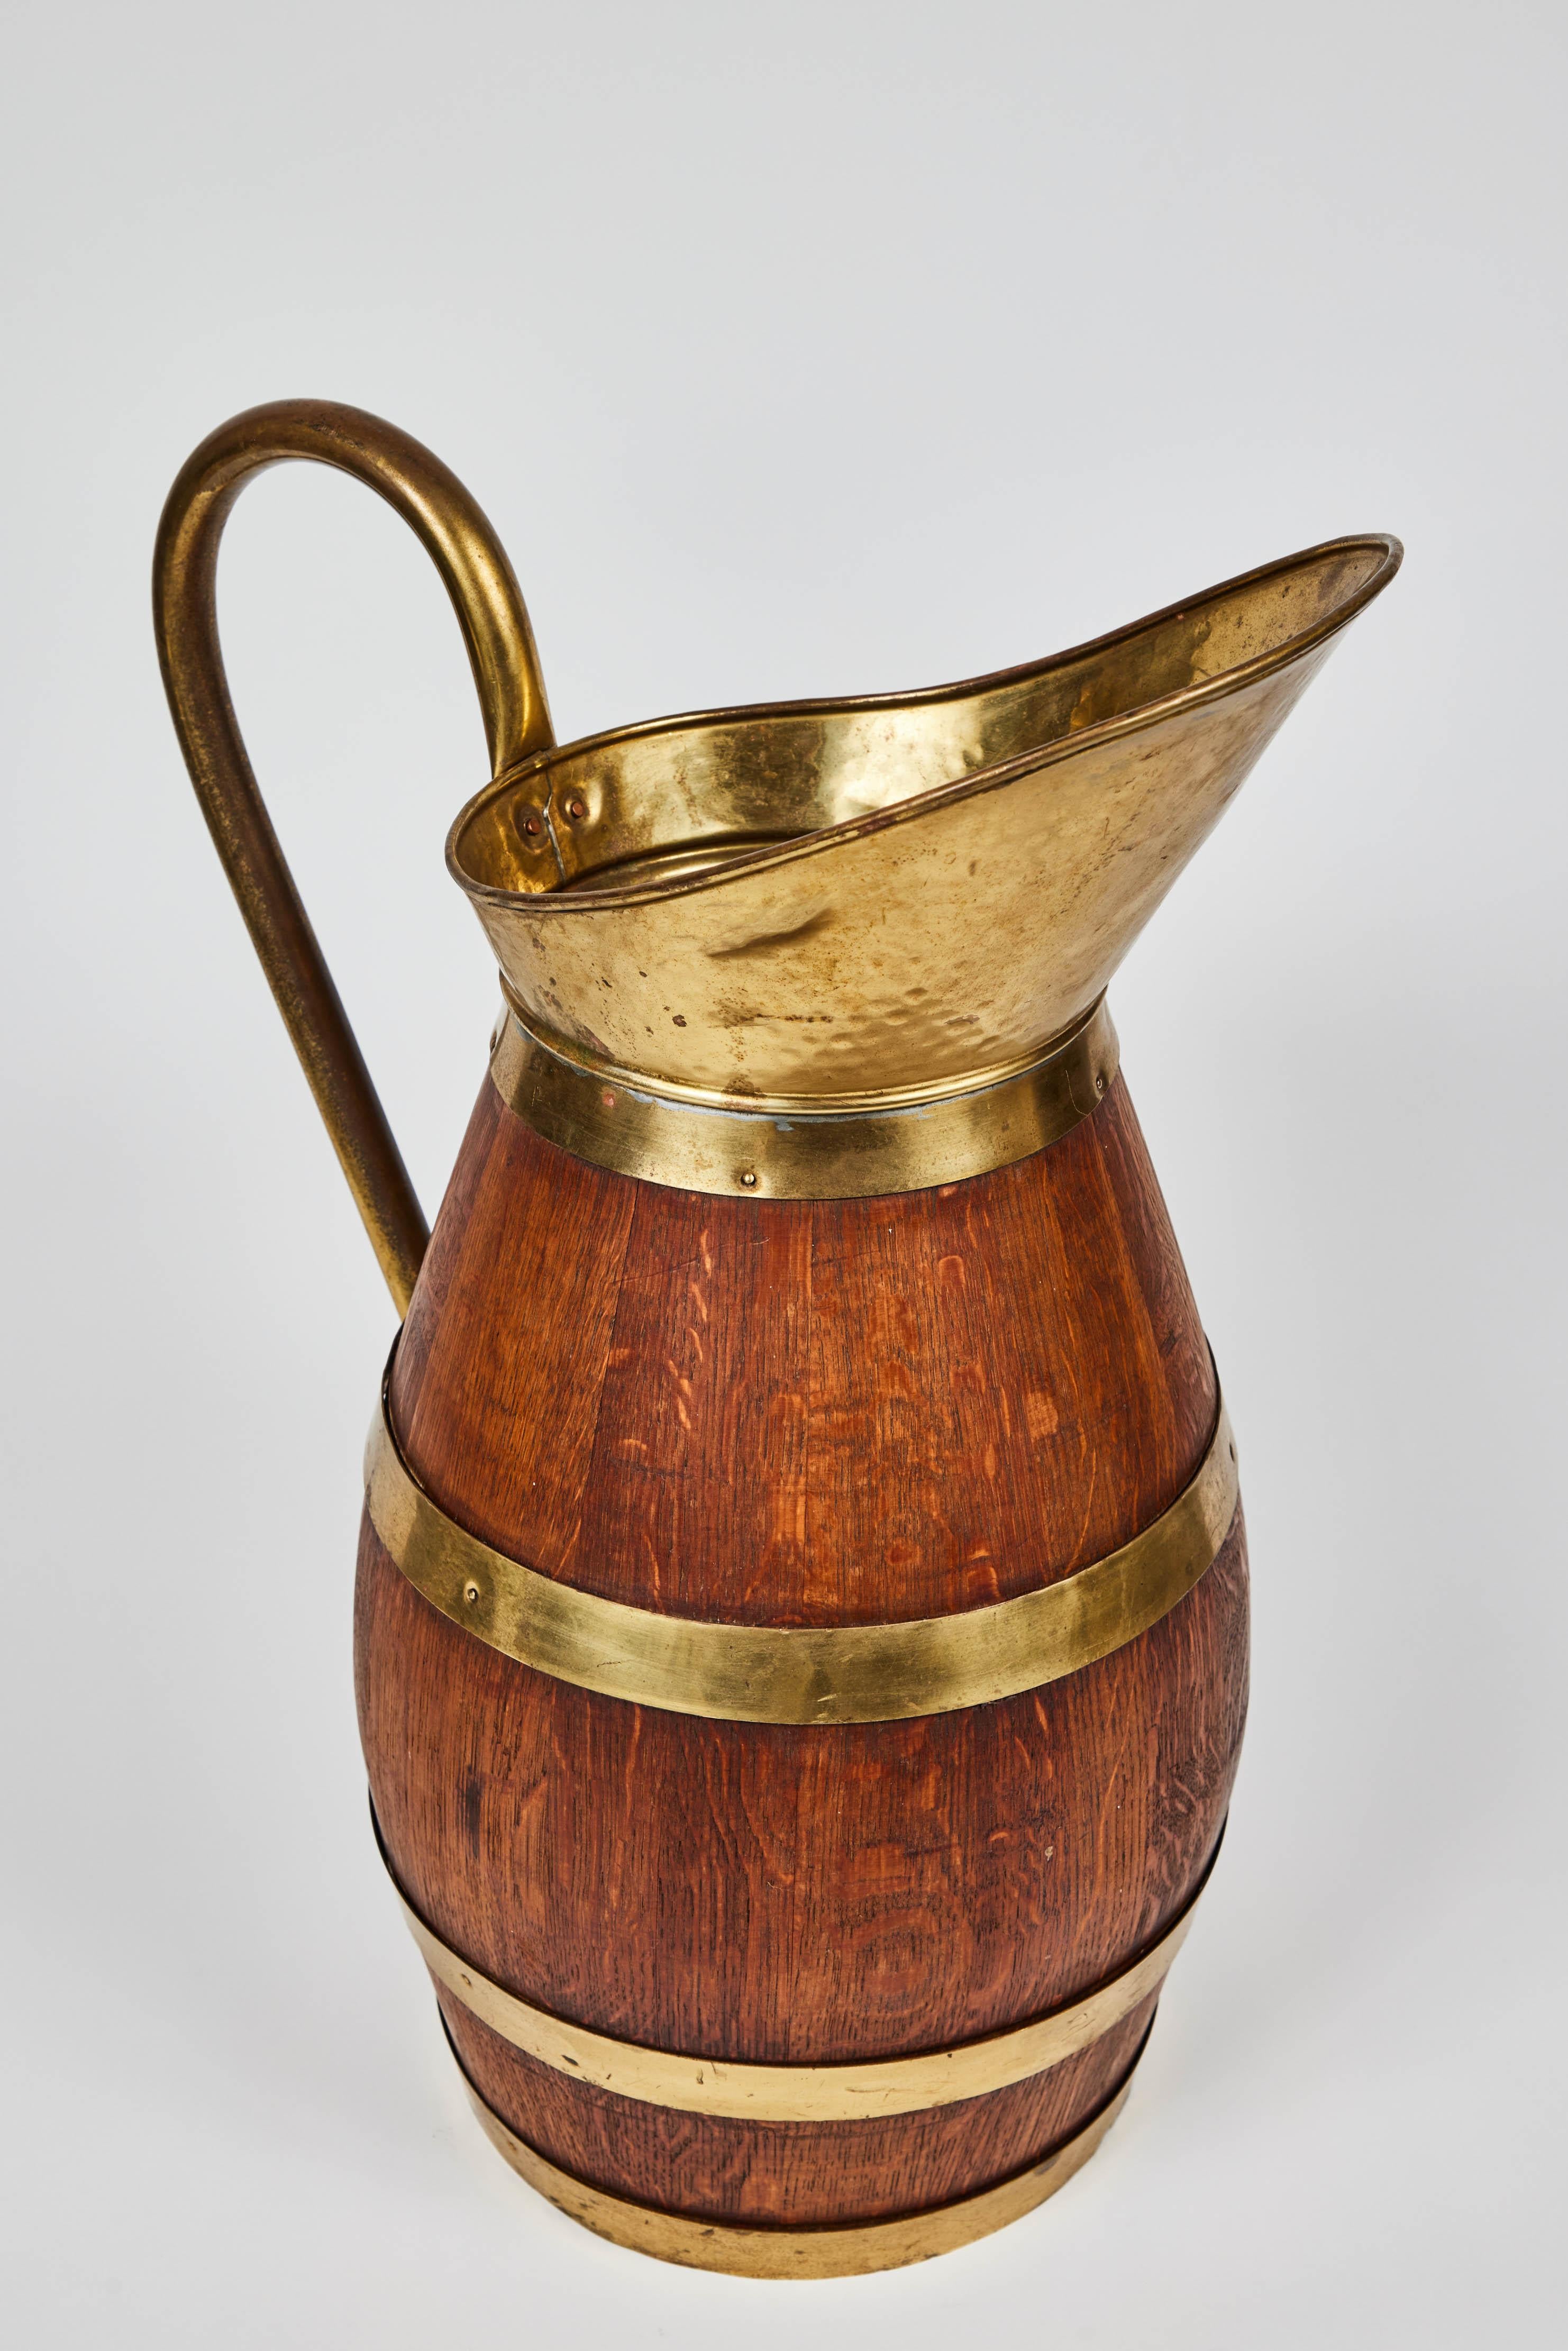 Antique French oak staved and copper-bound wine or cider jugs with copper bands, spout and handles c.1900 -1930. These are made in the same way as the big wine barrels are made.